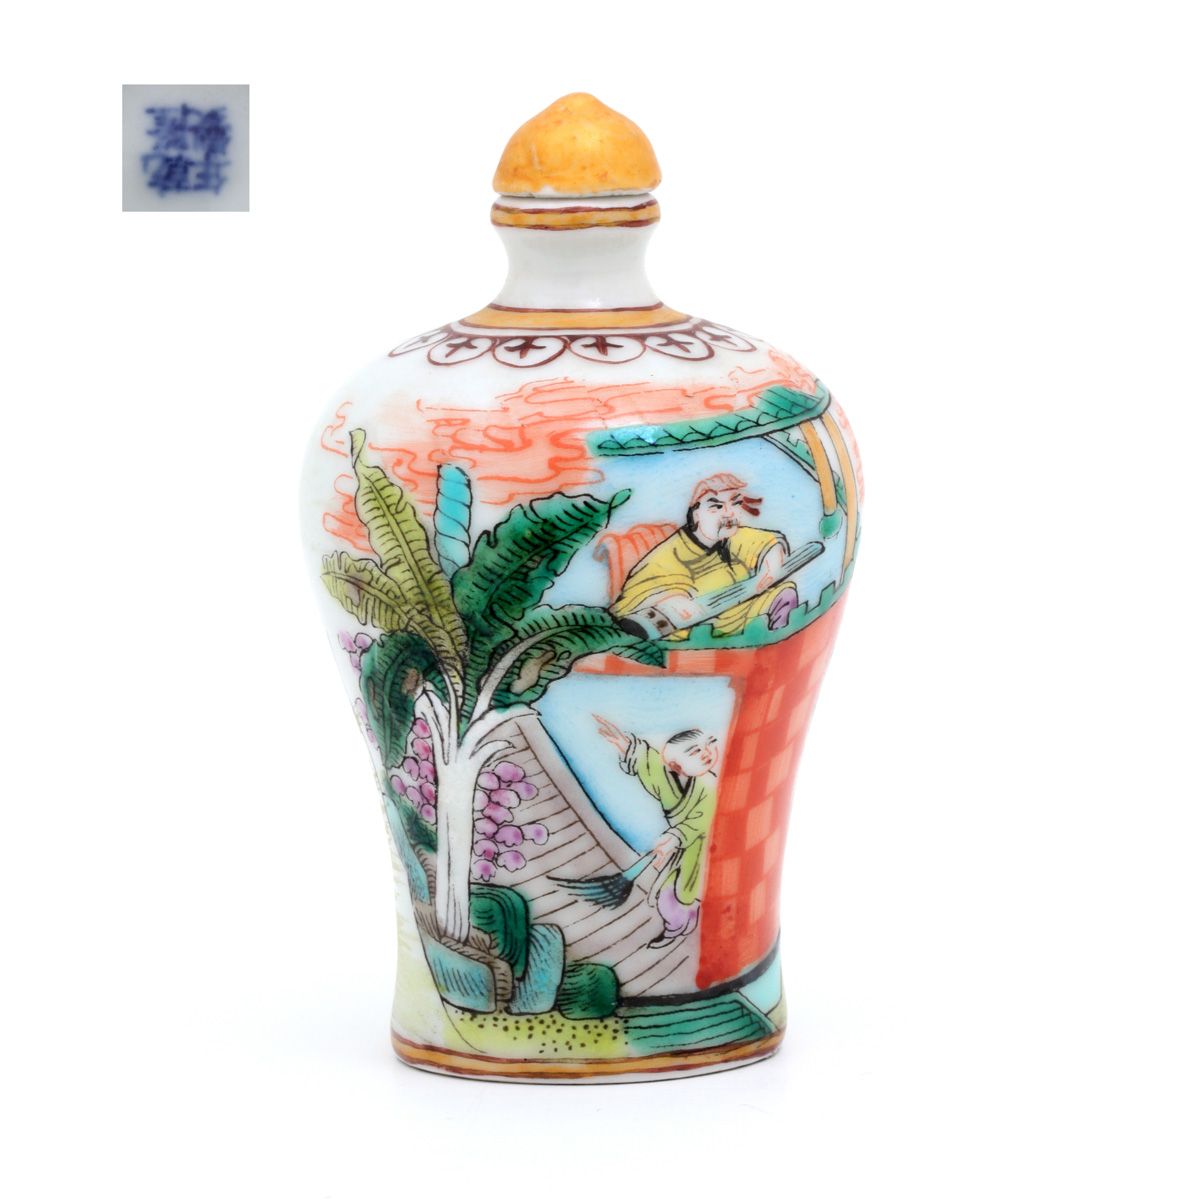 A SNUFF-BOTTLE A SNUFF-BOTTLE Chinese porcelain, polychrome decoration depicting&hellip;